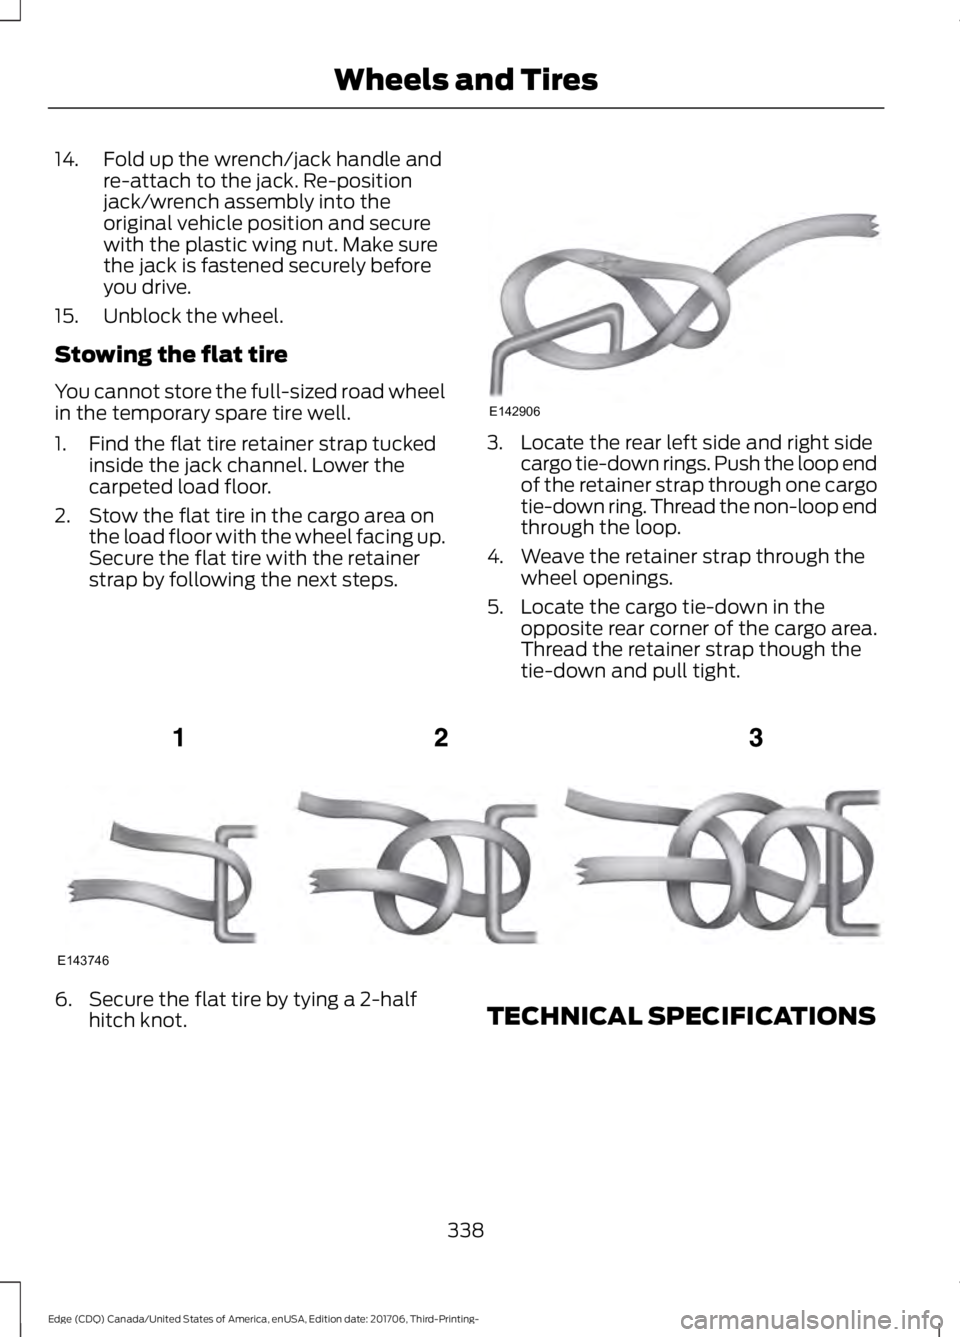 FORD EDGE 2018 Owners Manual 14. Fold up the wrench/jack handle and
re-attach to the jack. Re-position
jack/wrench assembly into the
original vehicle position and secure
with the plastic wing nut. Make sure
the jack is fastened s